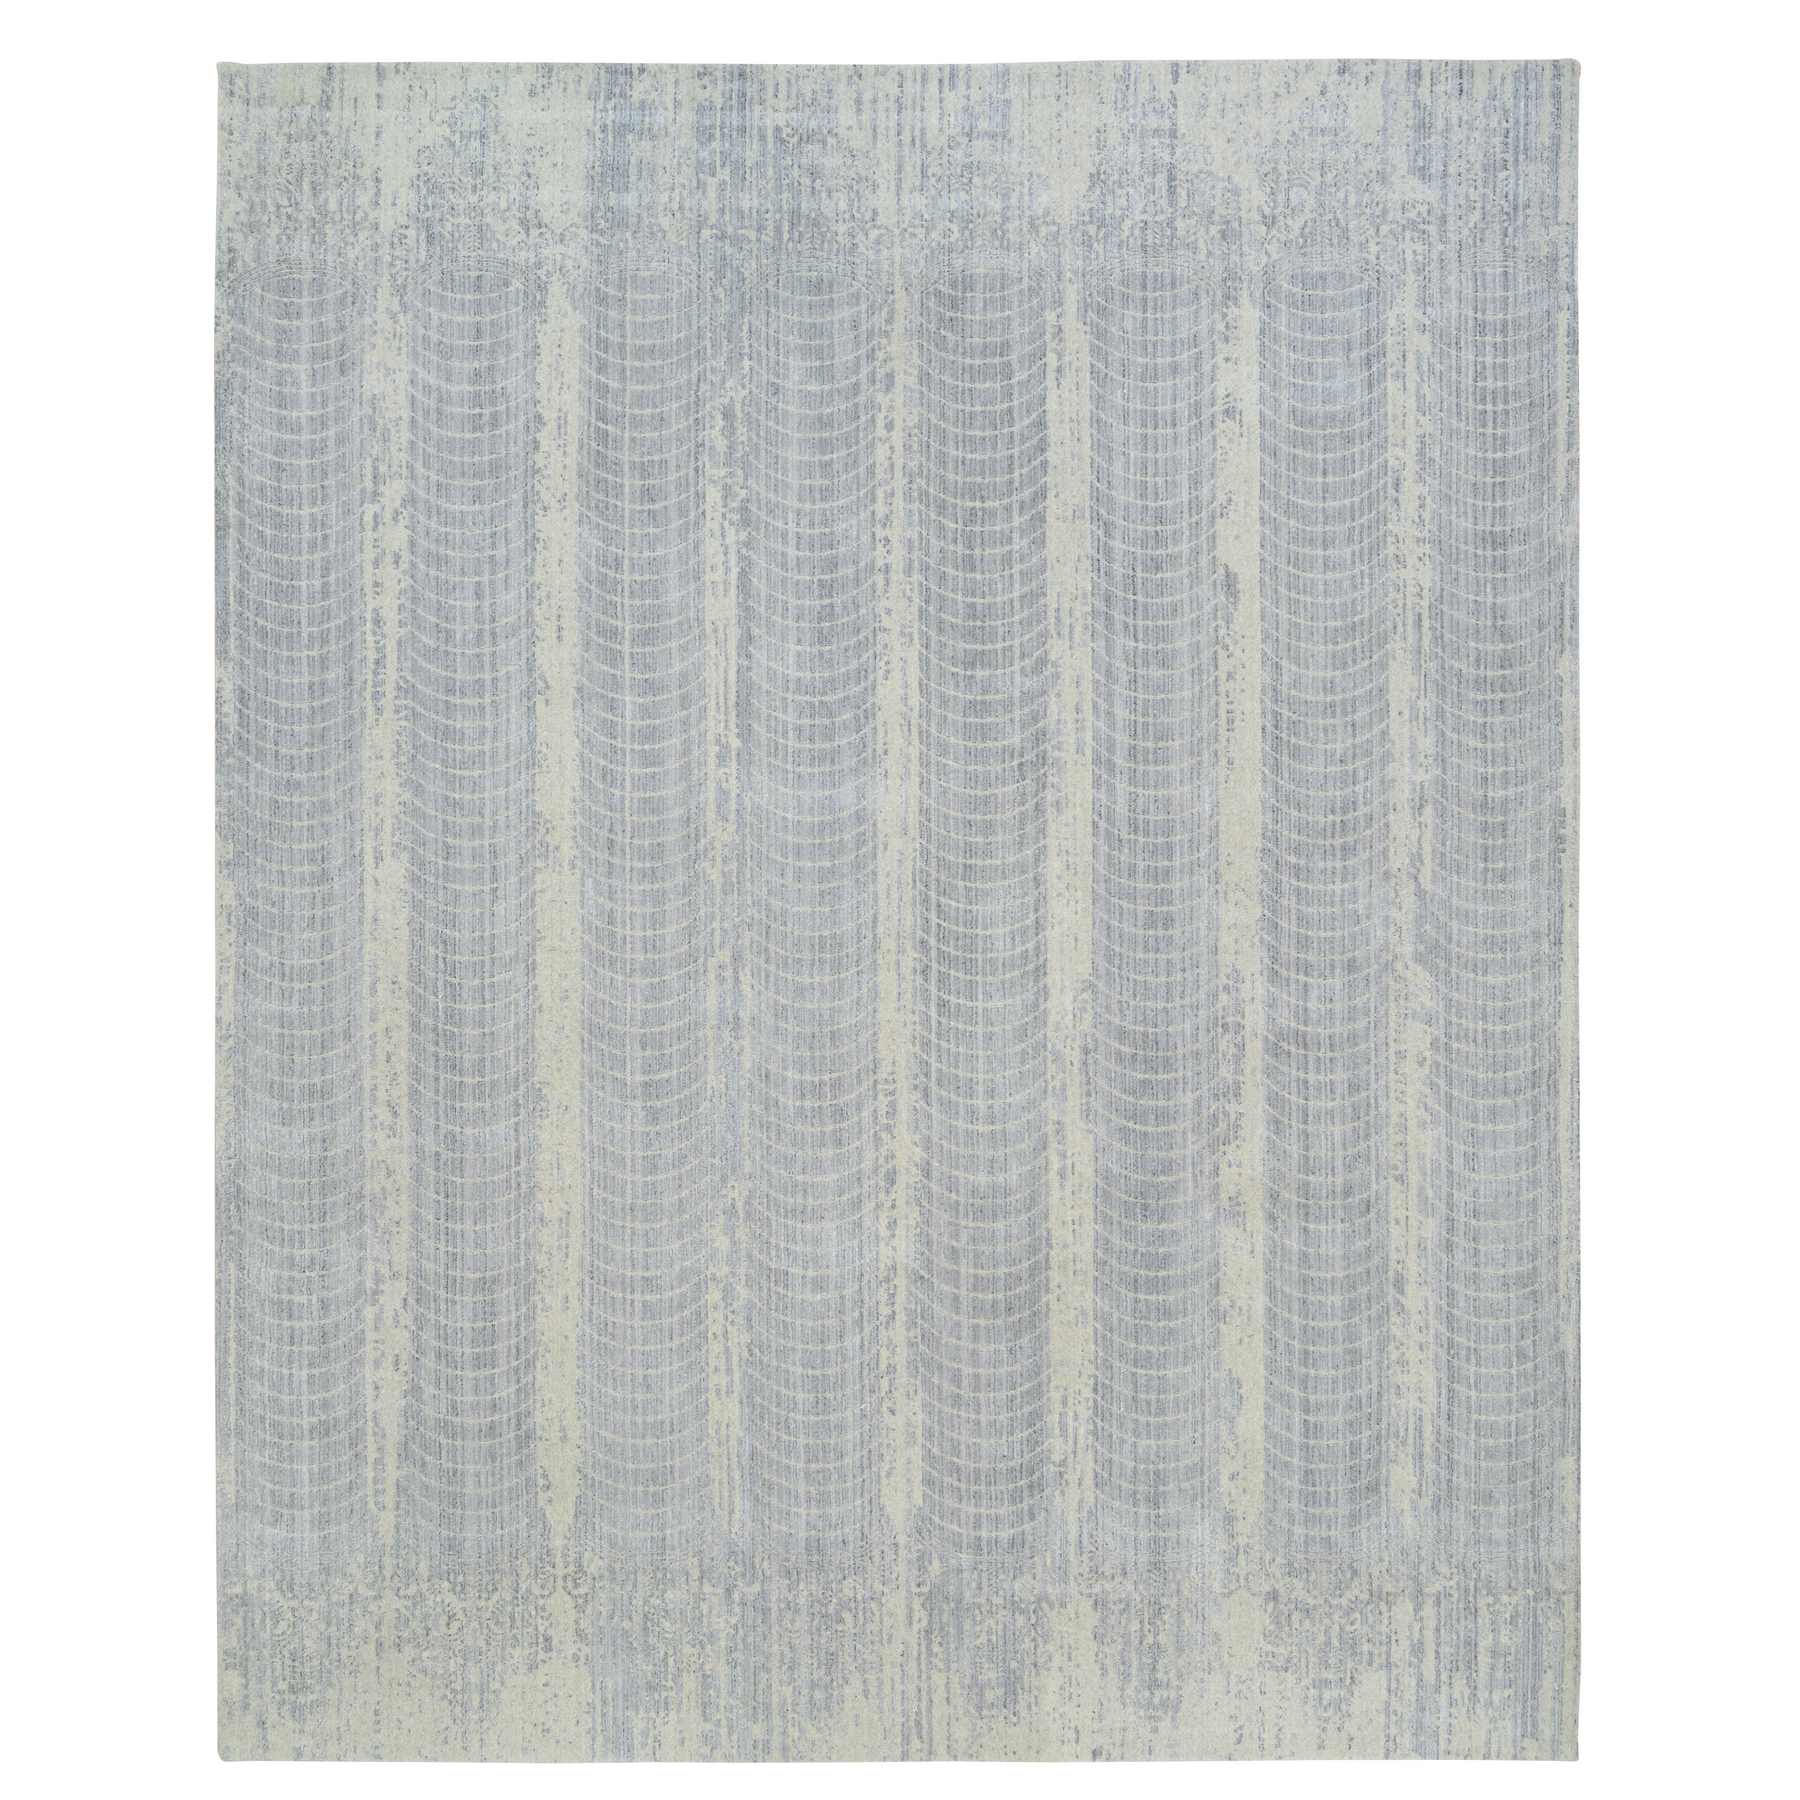 Modern-and-Contemporary-Hand-Loomed-Rug-319020